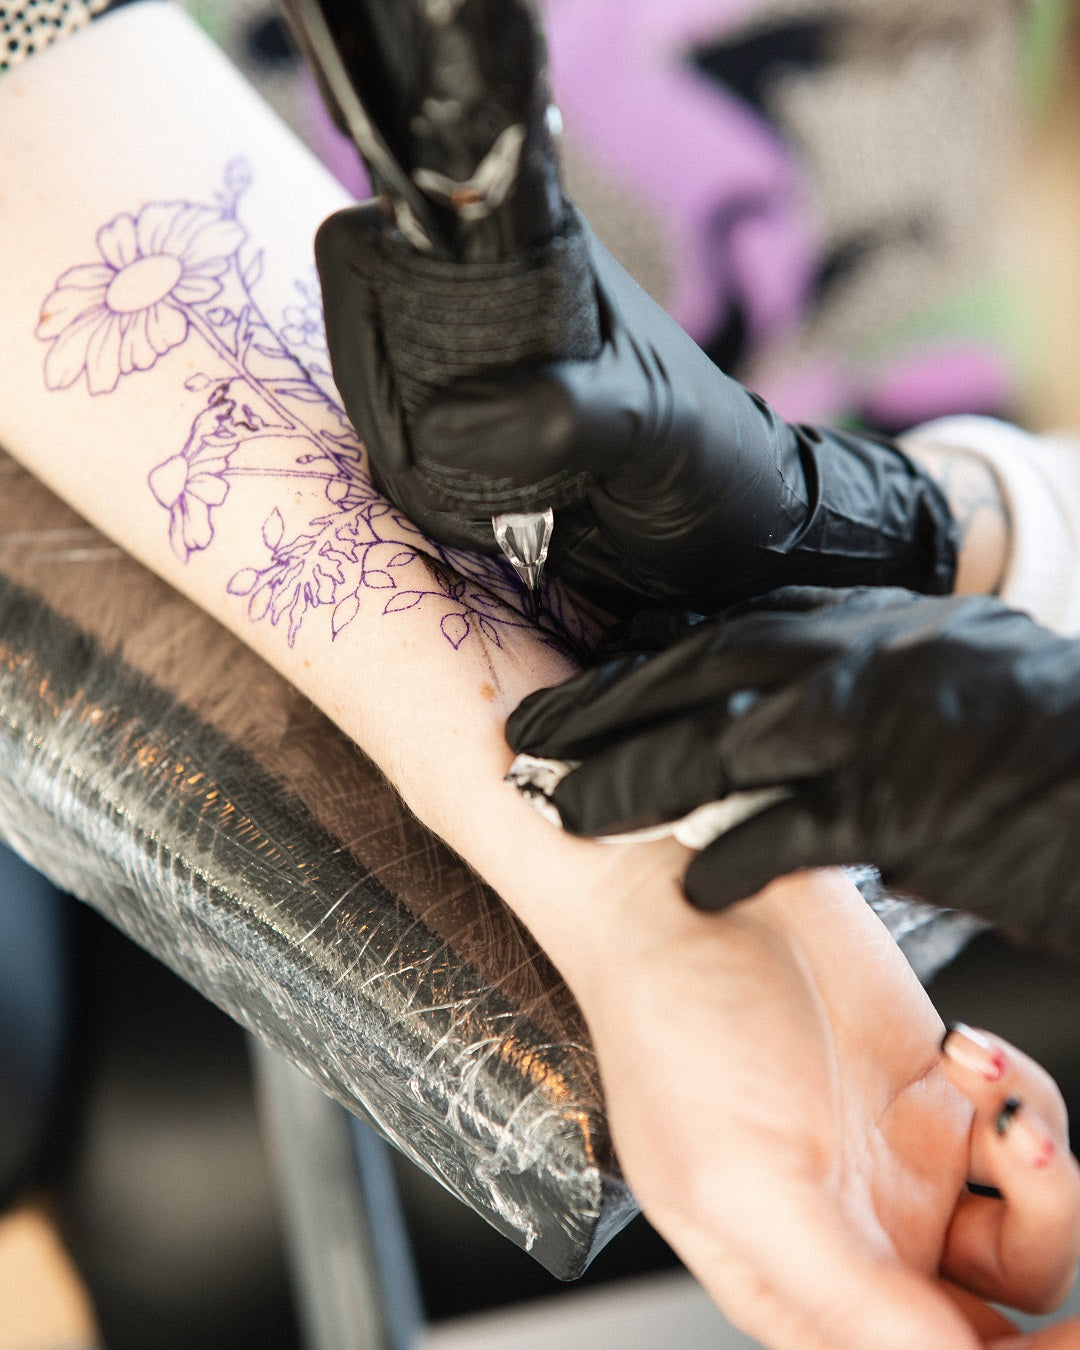 'Like Wet Fire Pulling My Skin Off': The Most Painful Place to Get a Tattoo Revealed